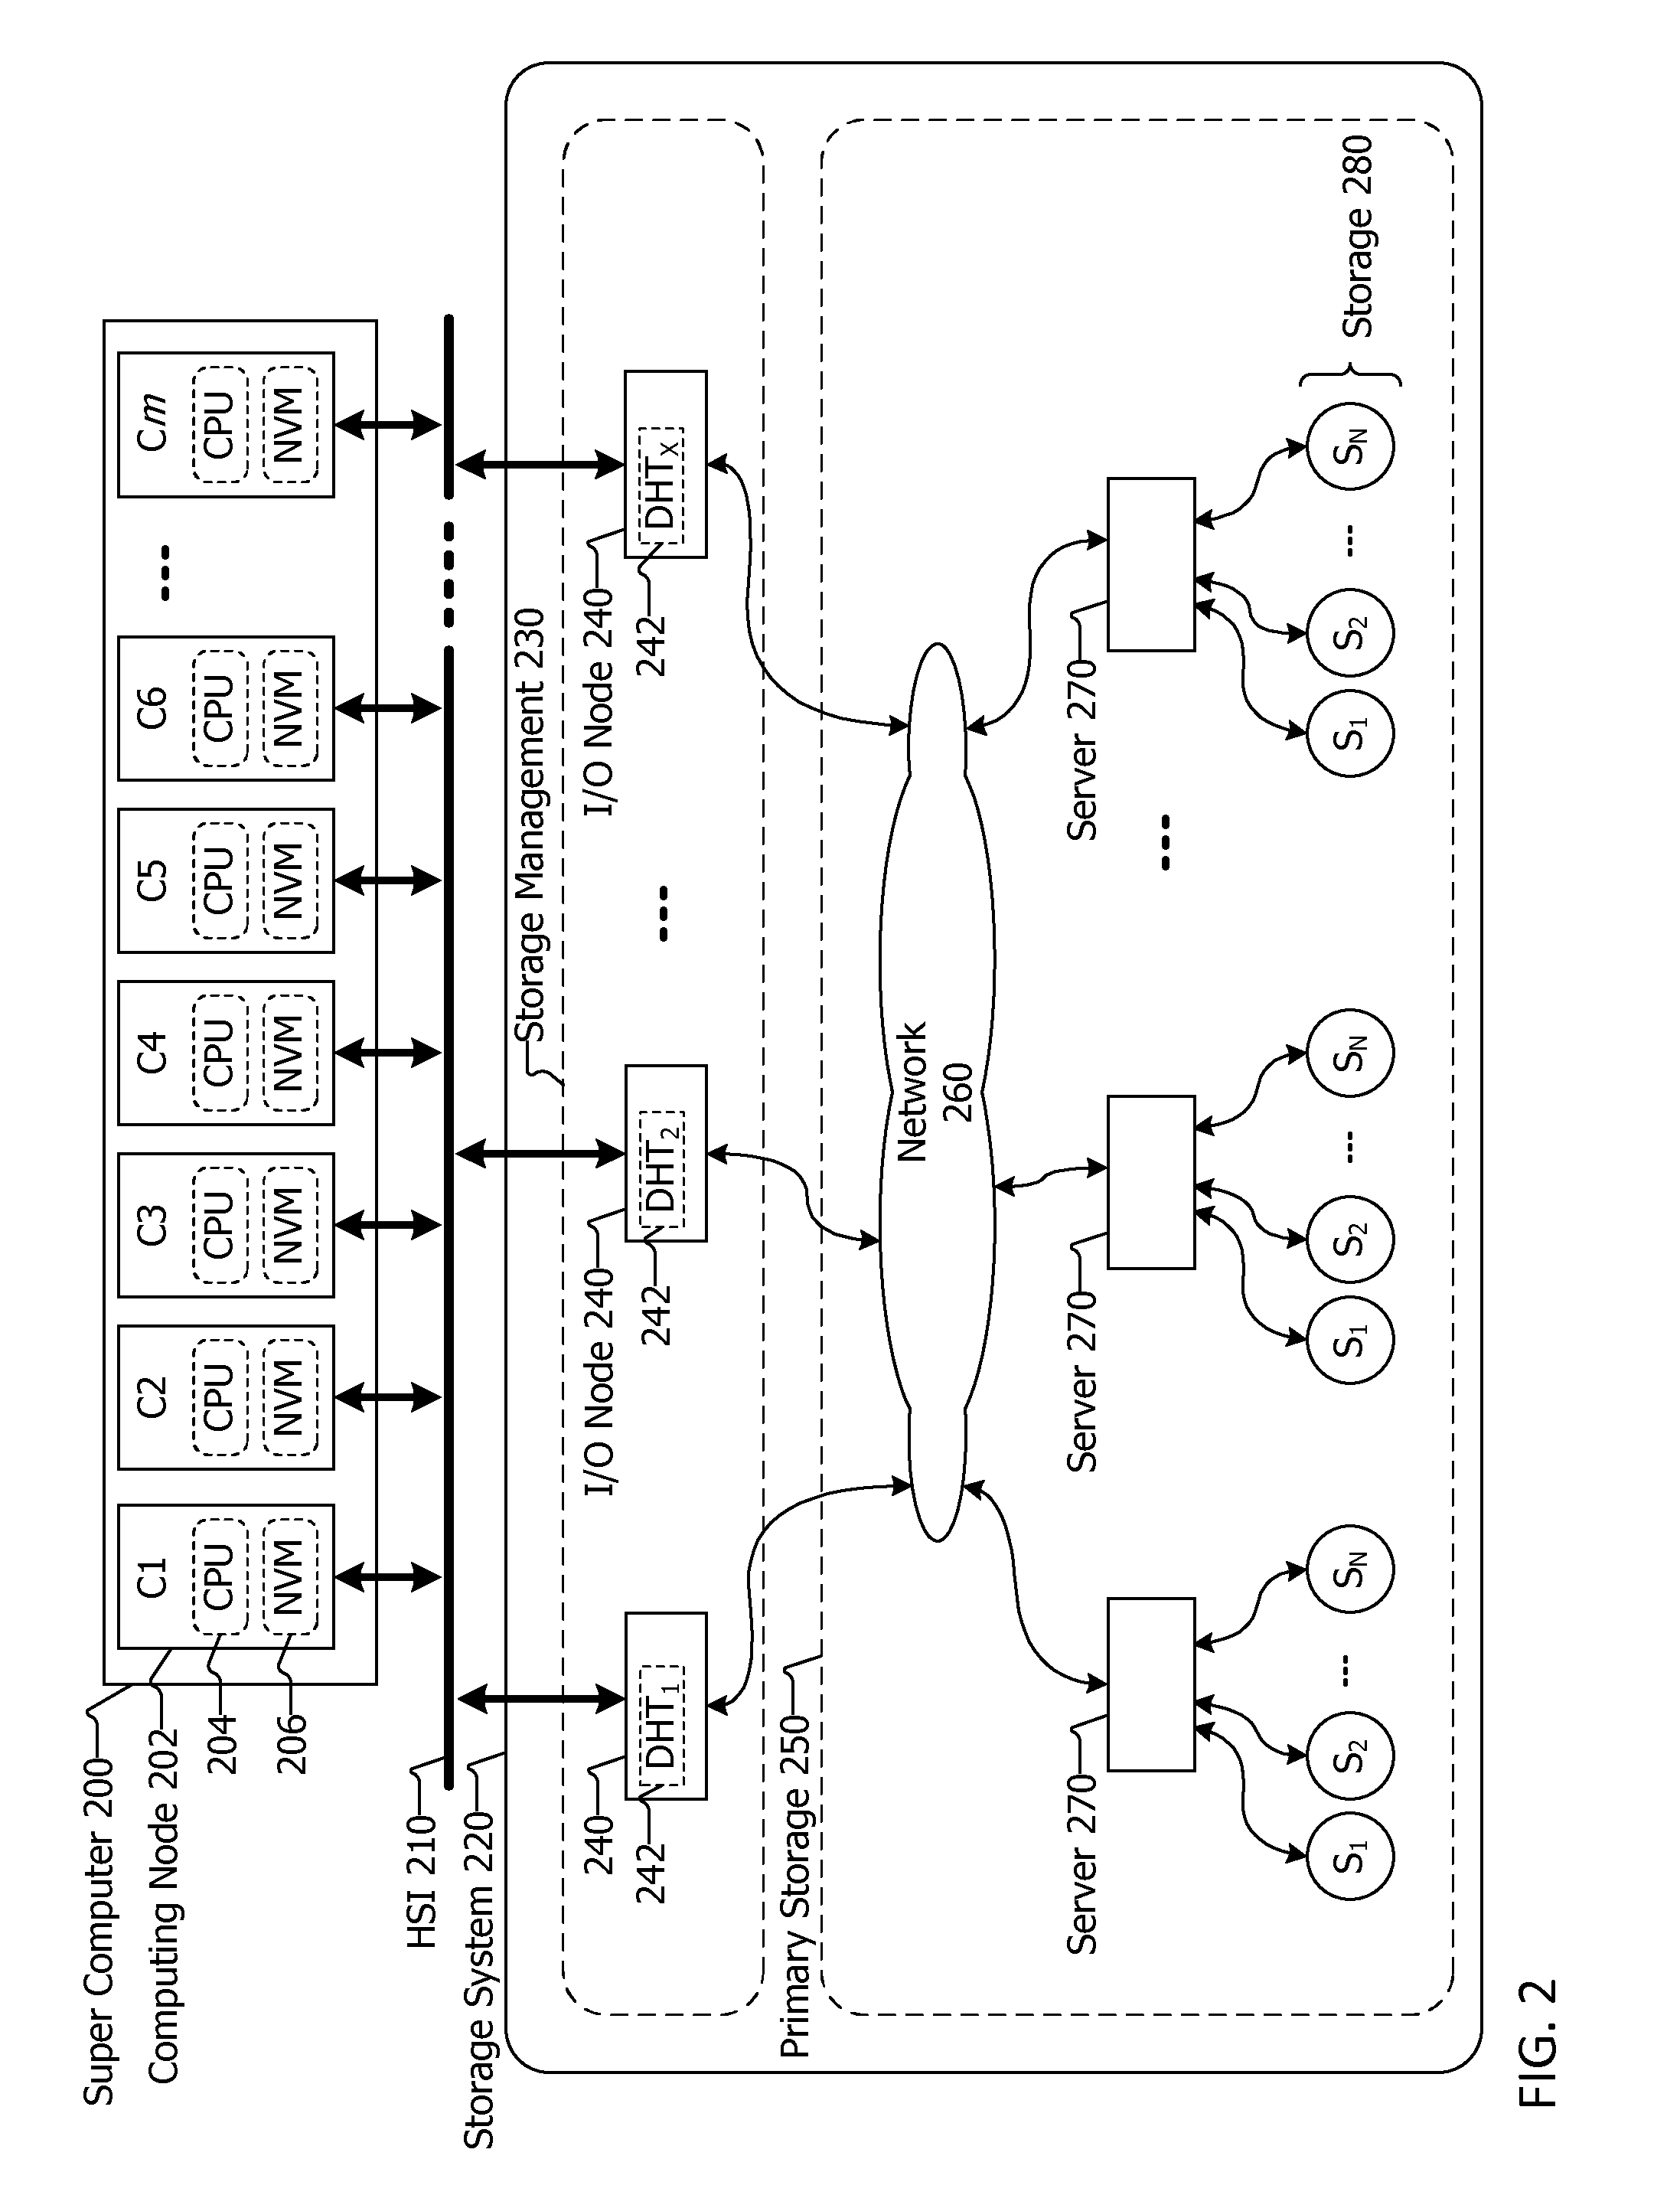 Data storage architecture and system for high performance computing